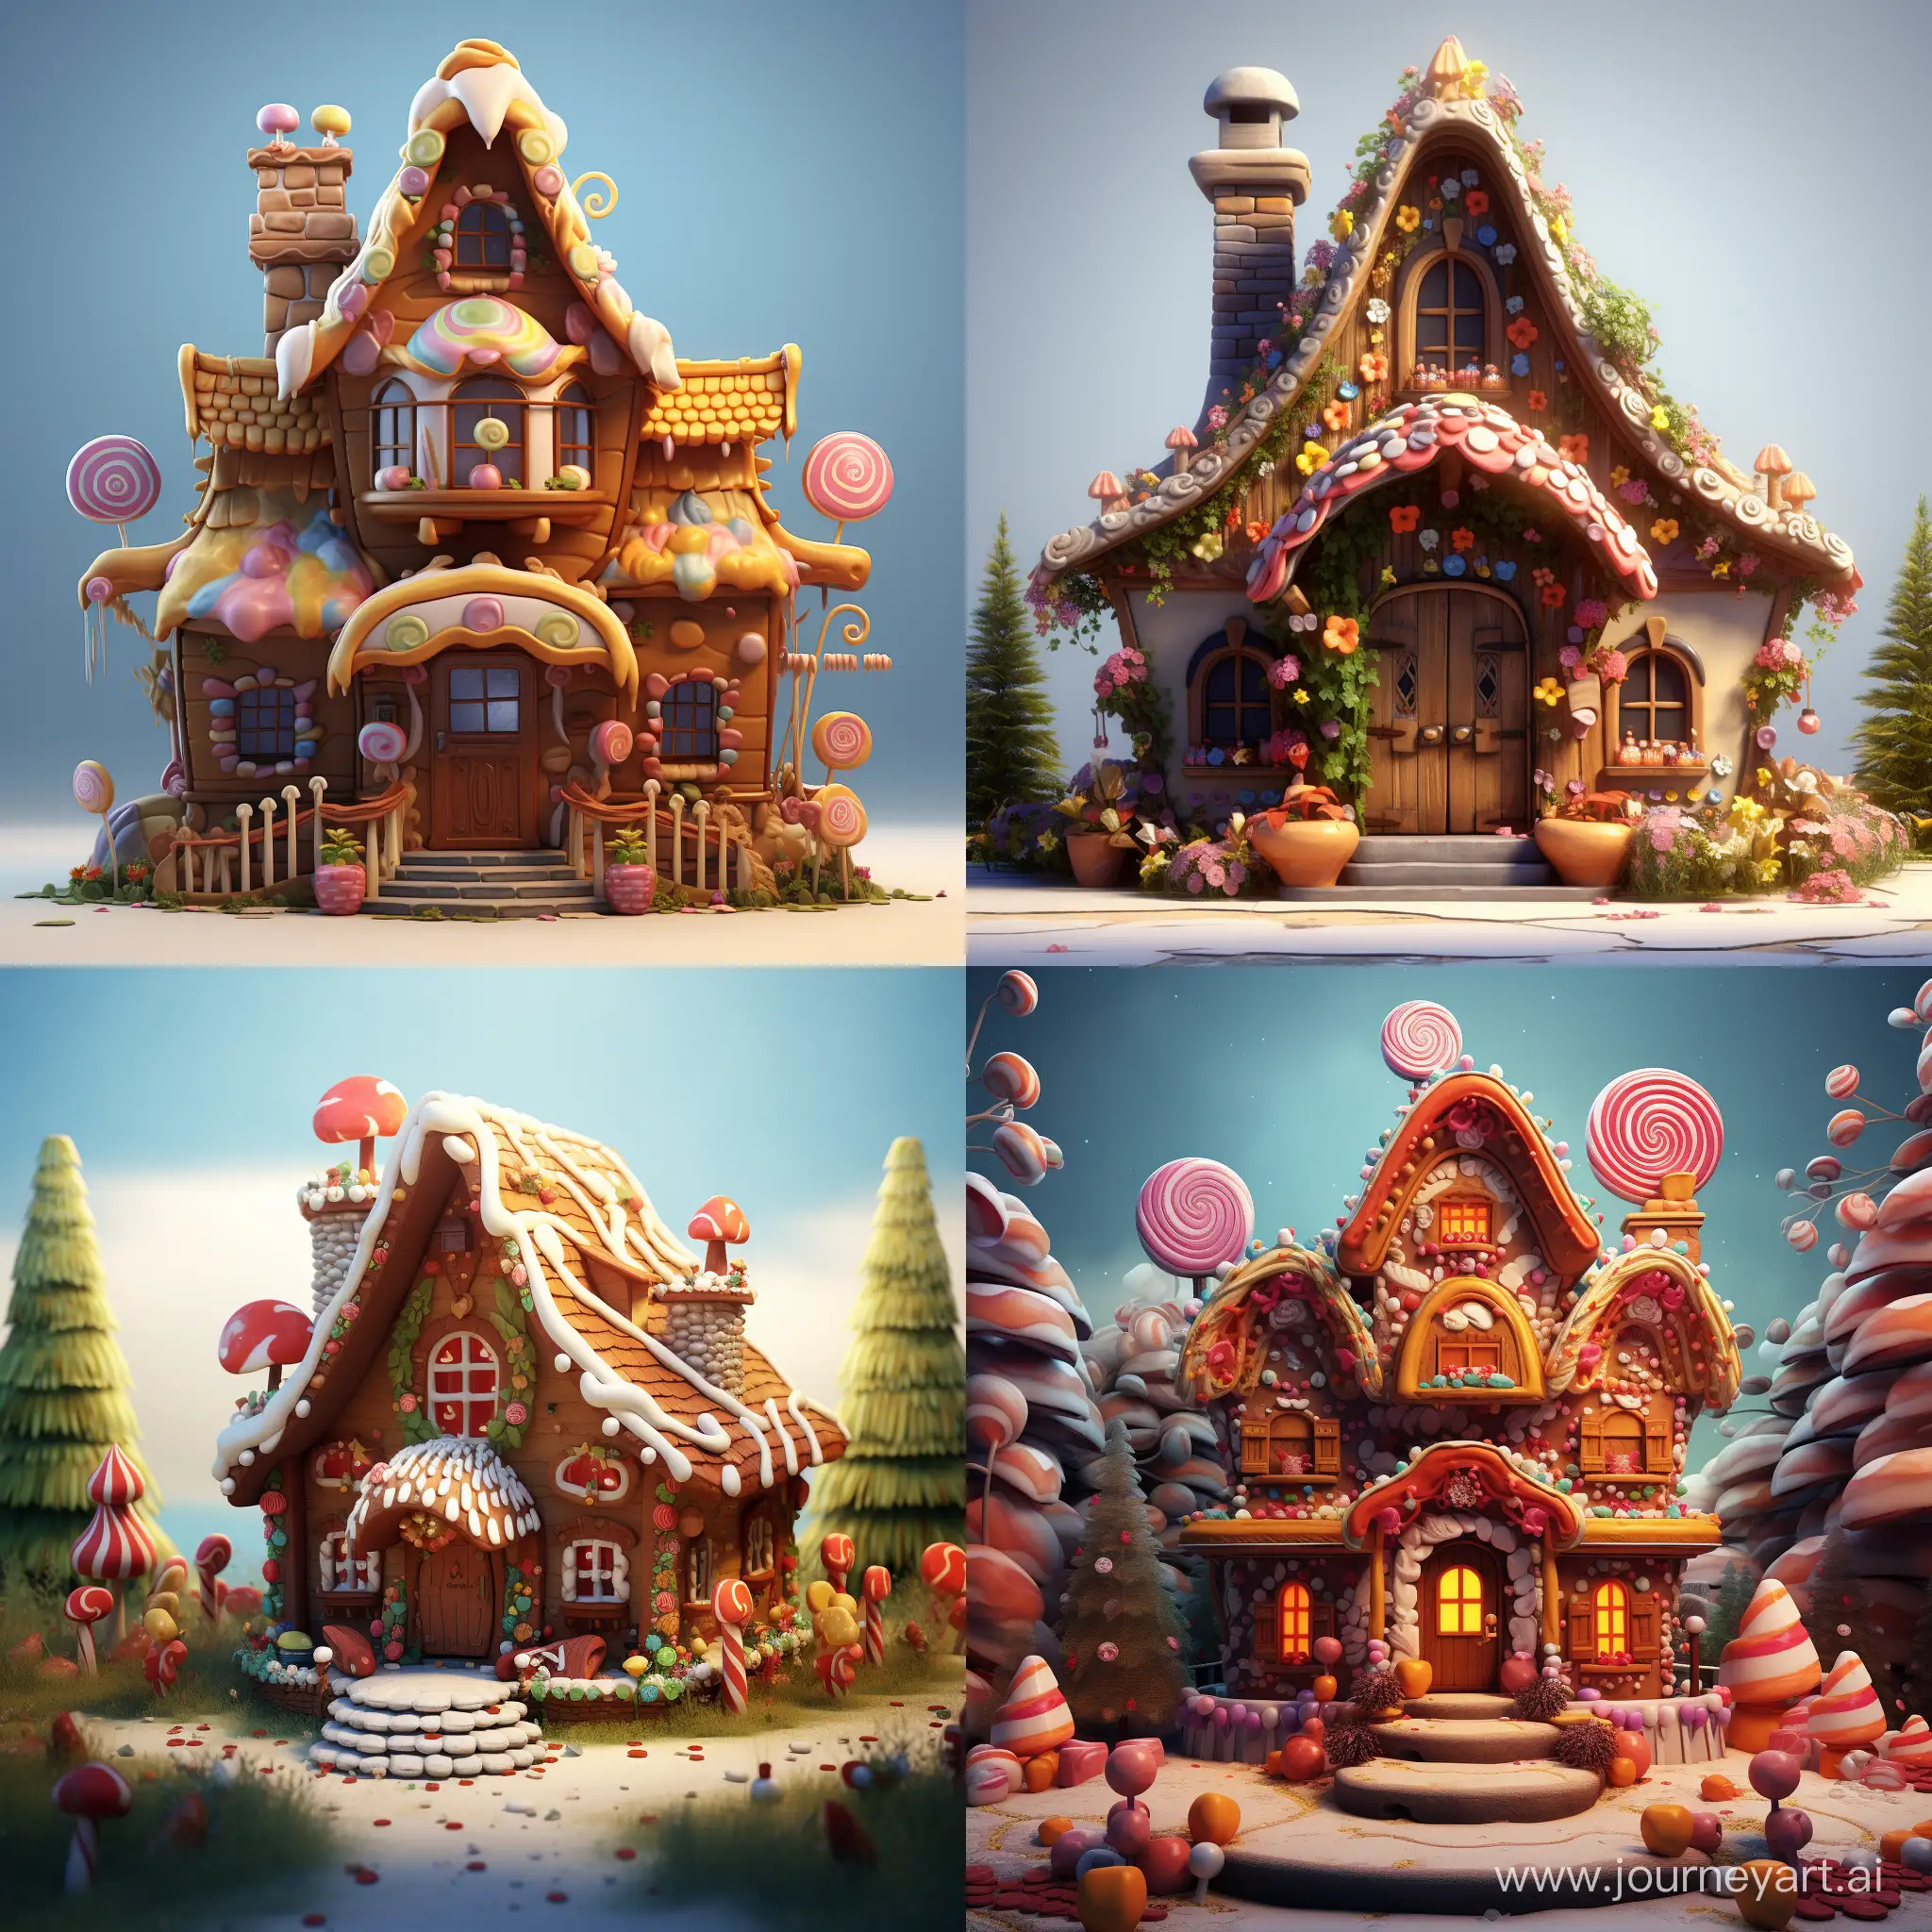 Whimsical-3D-Animation-Delightful-Gingerbread-House-Creation